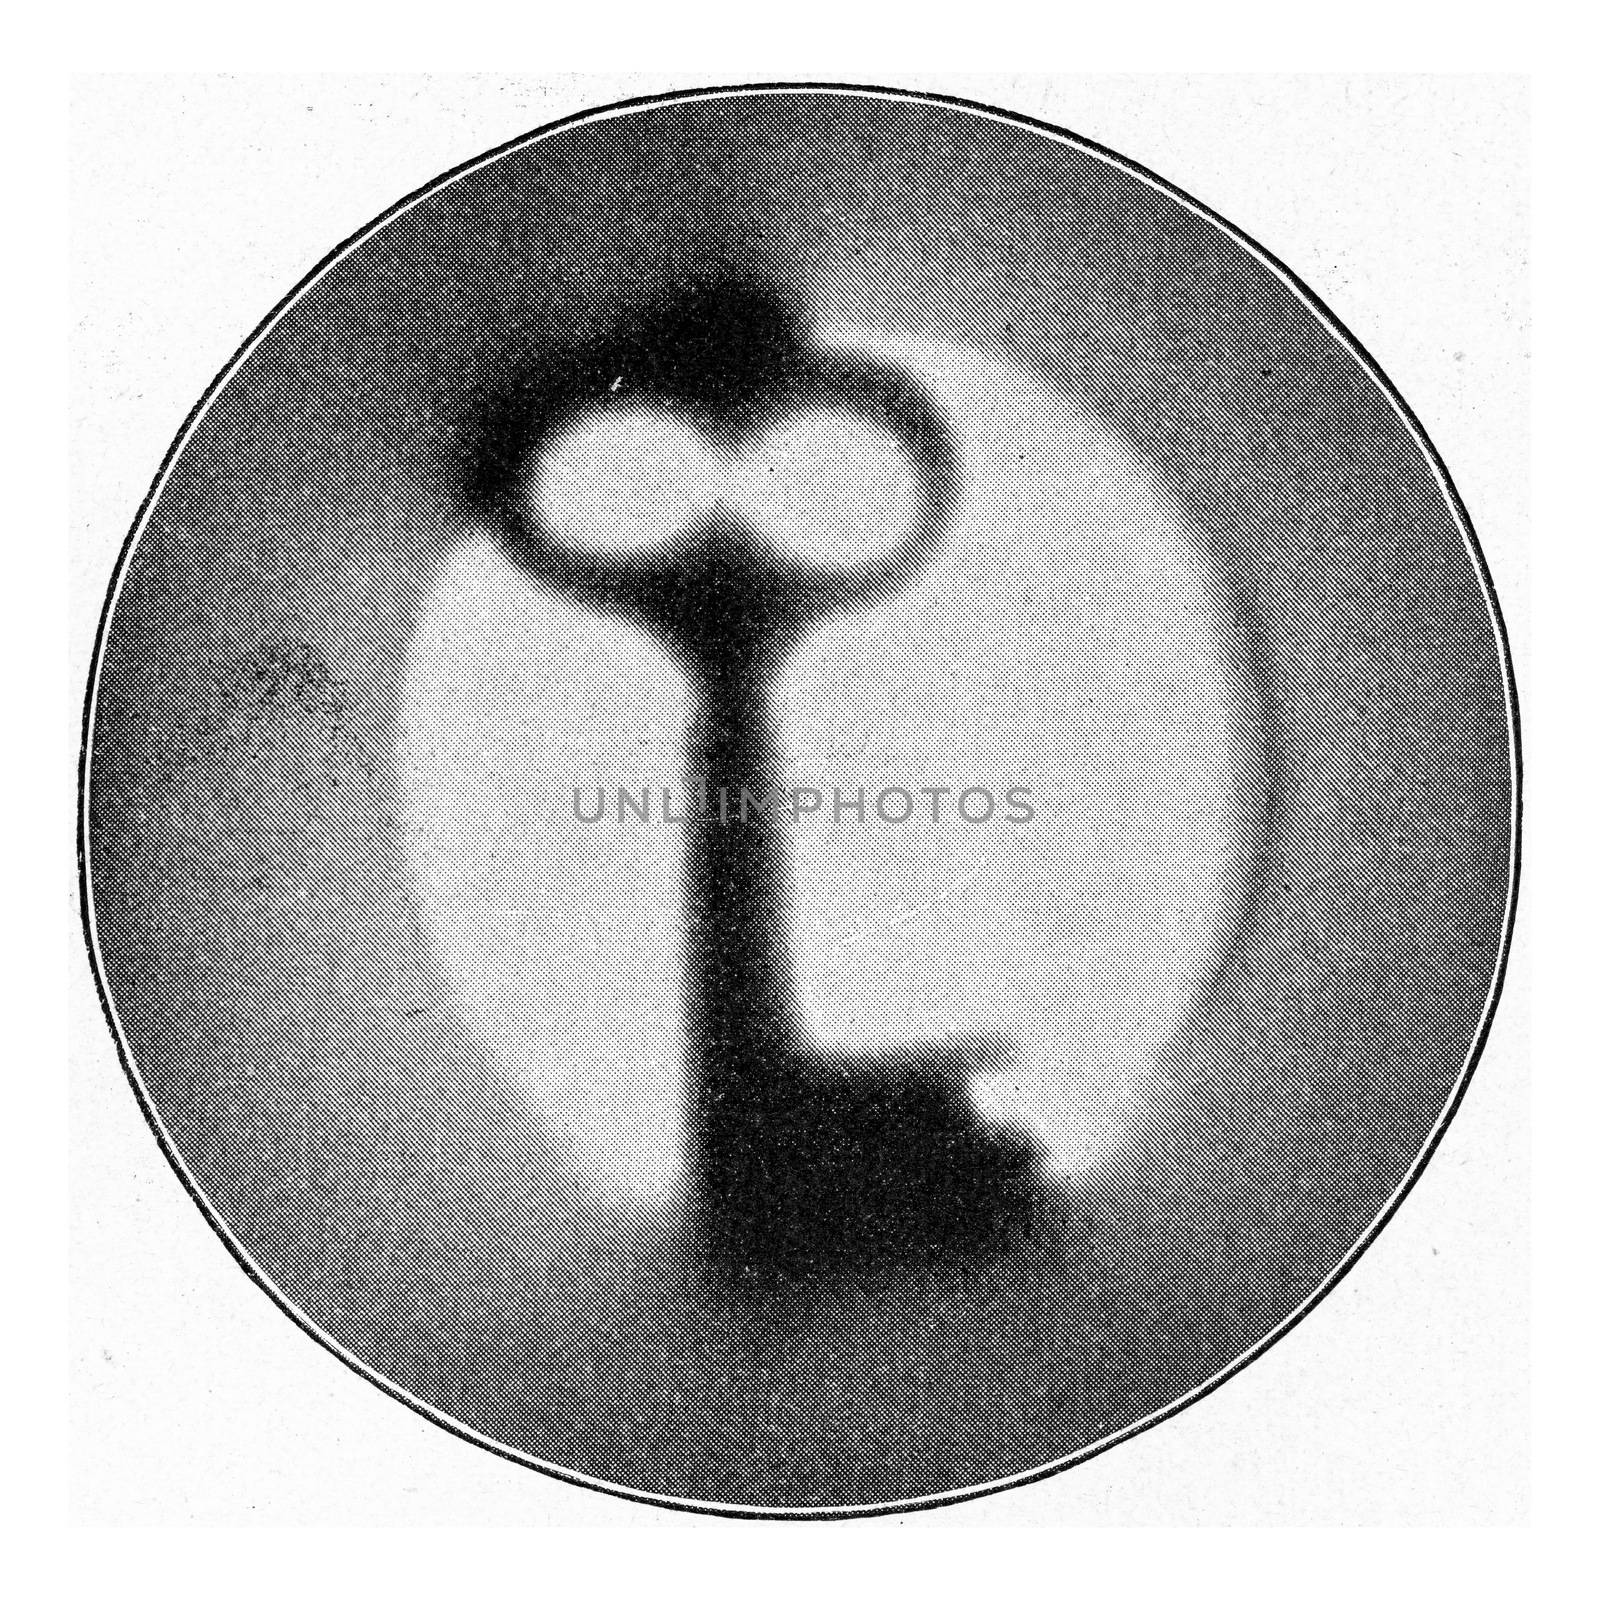 Photograph of a key with radium rays, vintage engraving. by Morphart